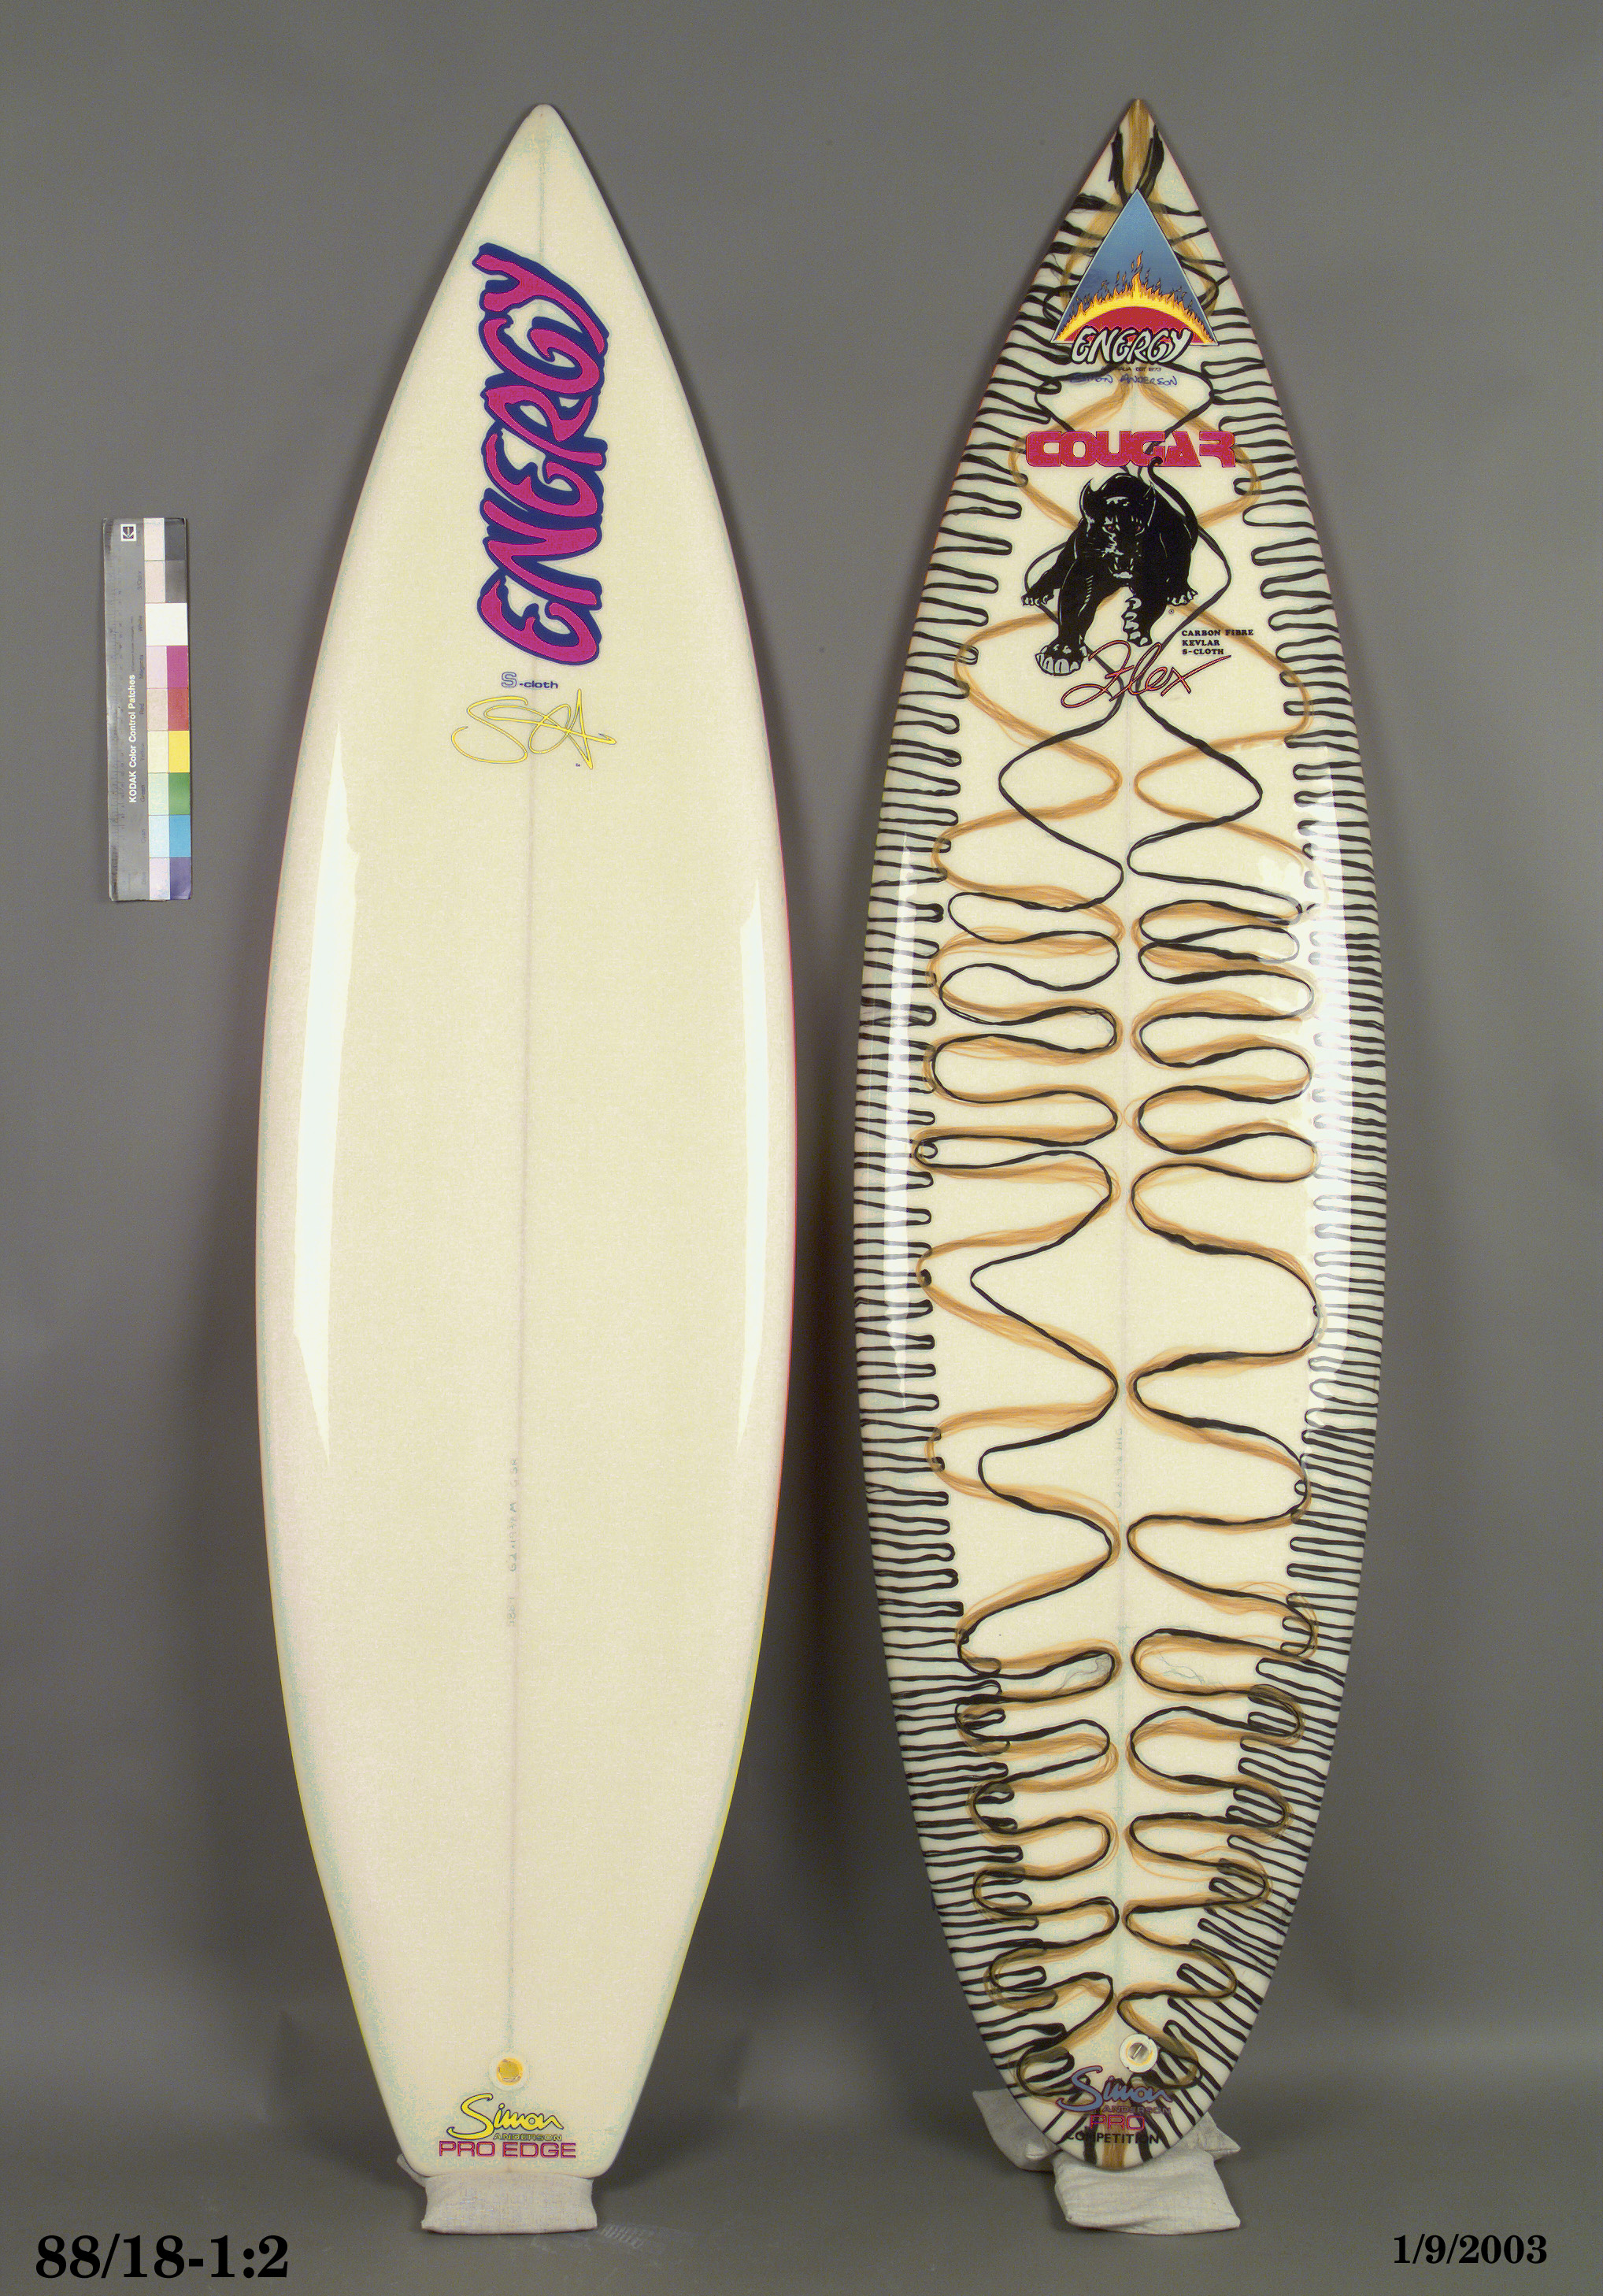 Three fin 'thruster' surfboards by Energy Surfboards